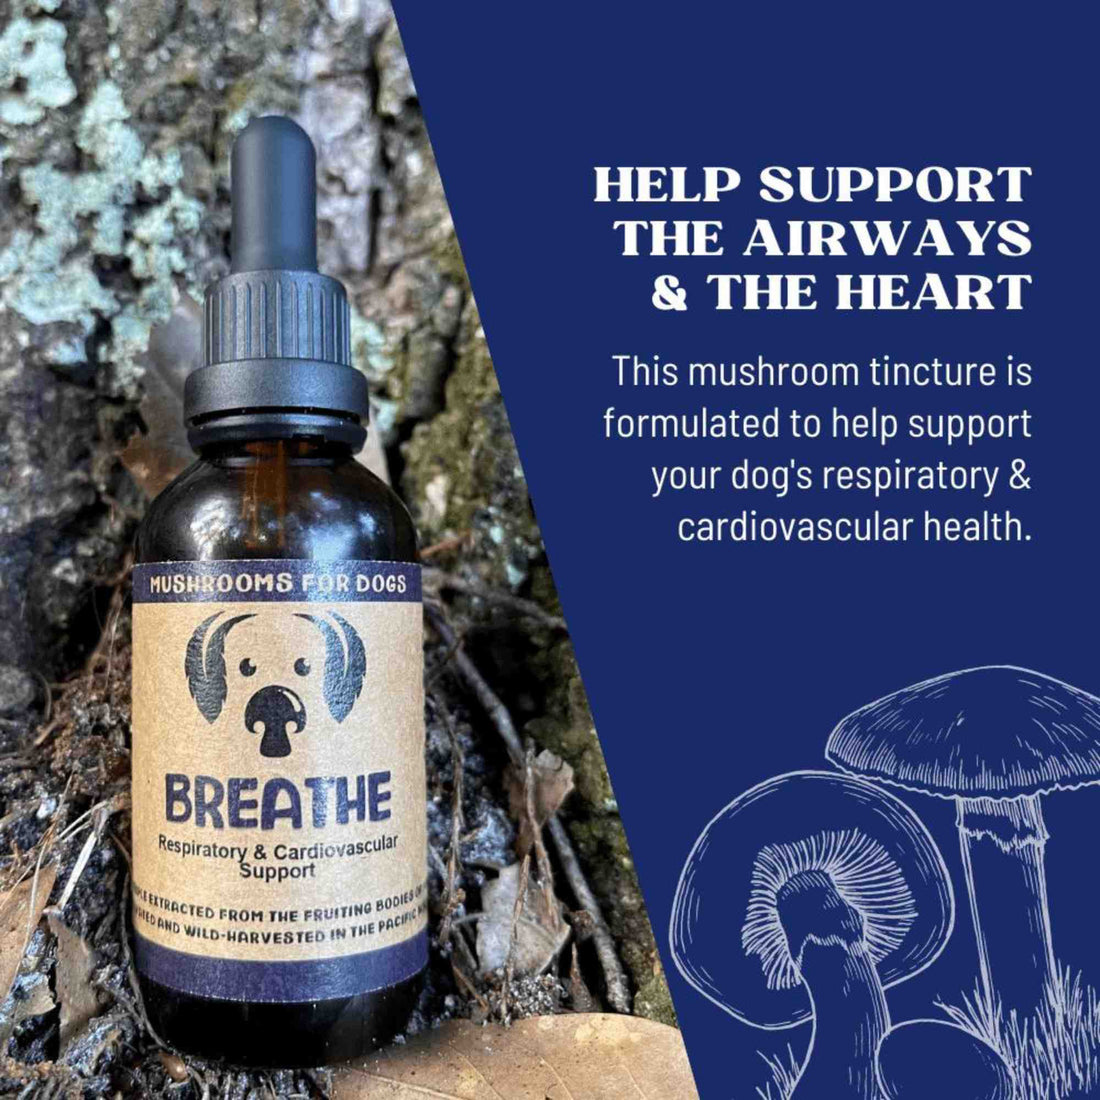 Breathe Mushrooms by mycodog for respiratory and cardiovascular health for dogs benefits